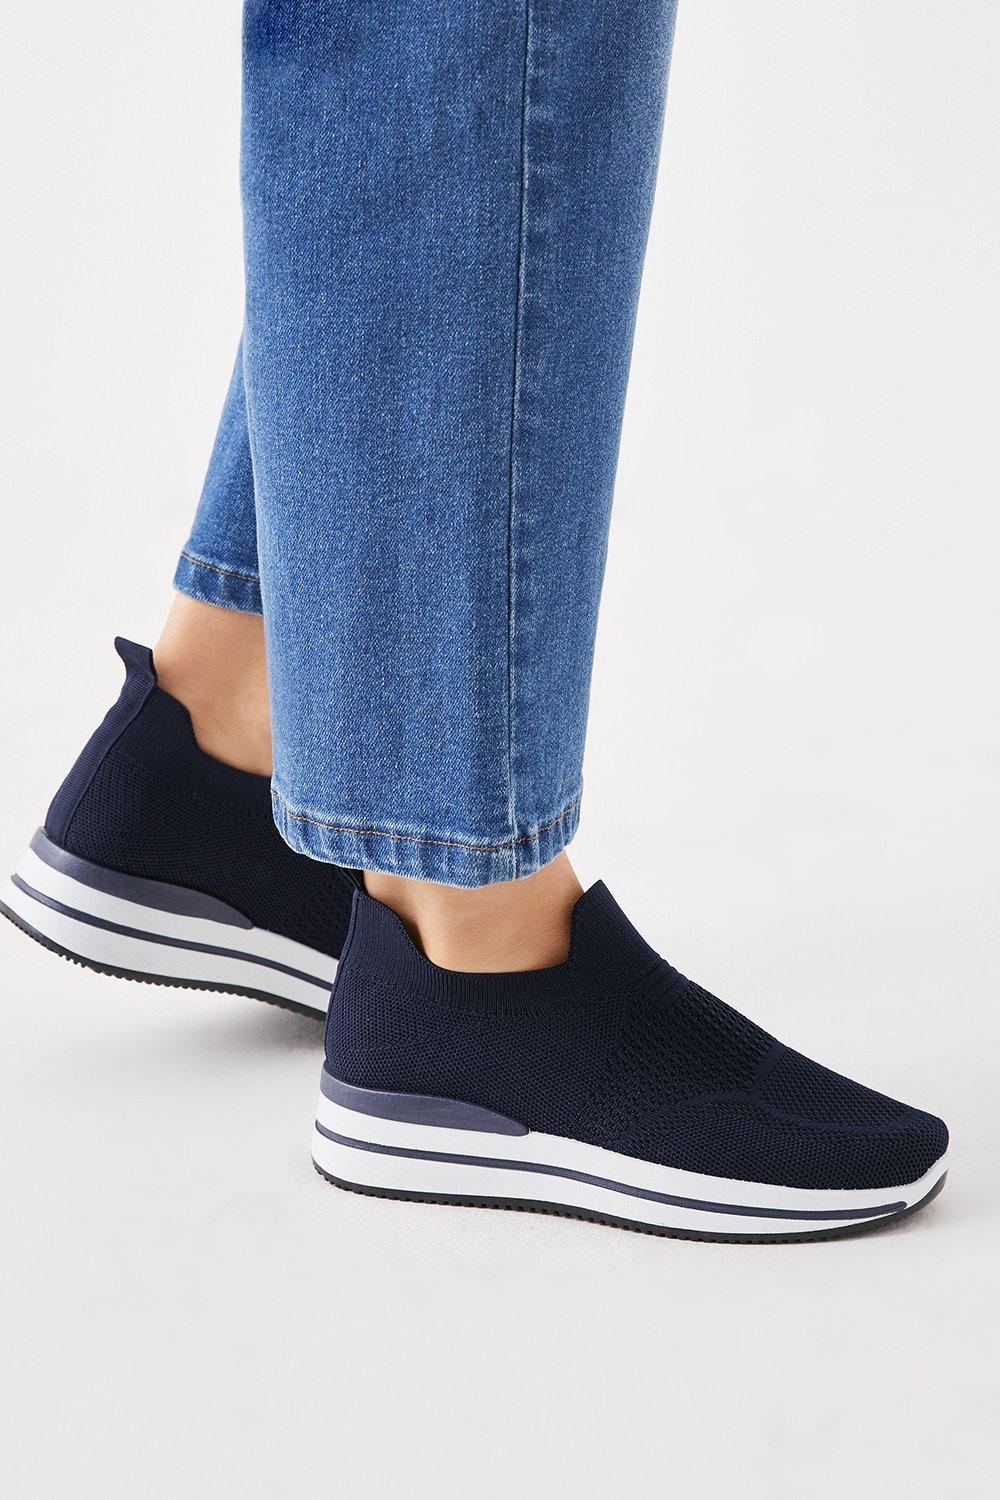 Women’s Good For The Sole: Naomi Wide Fit Comfort Trainers - navy - 7